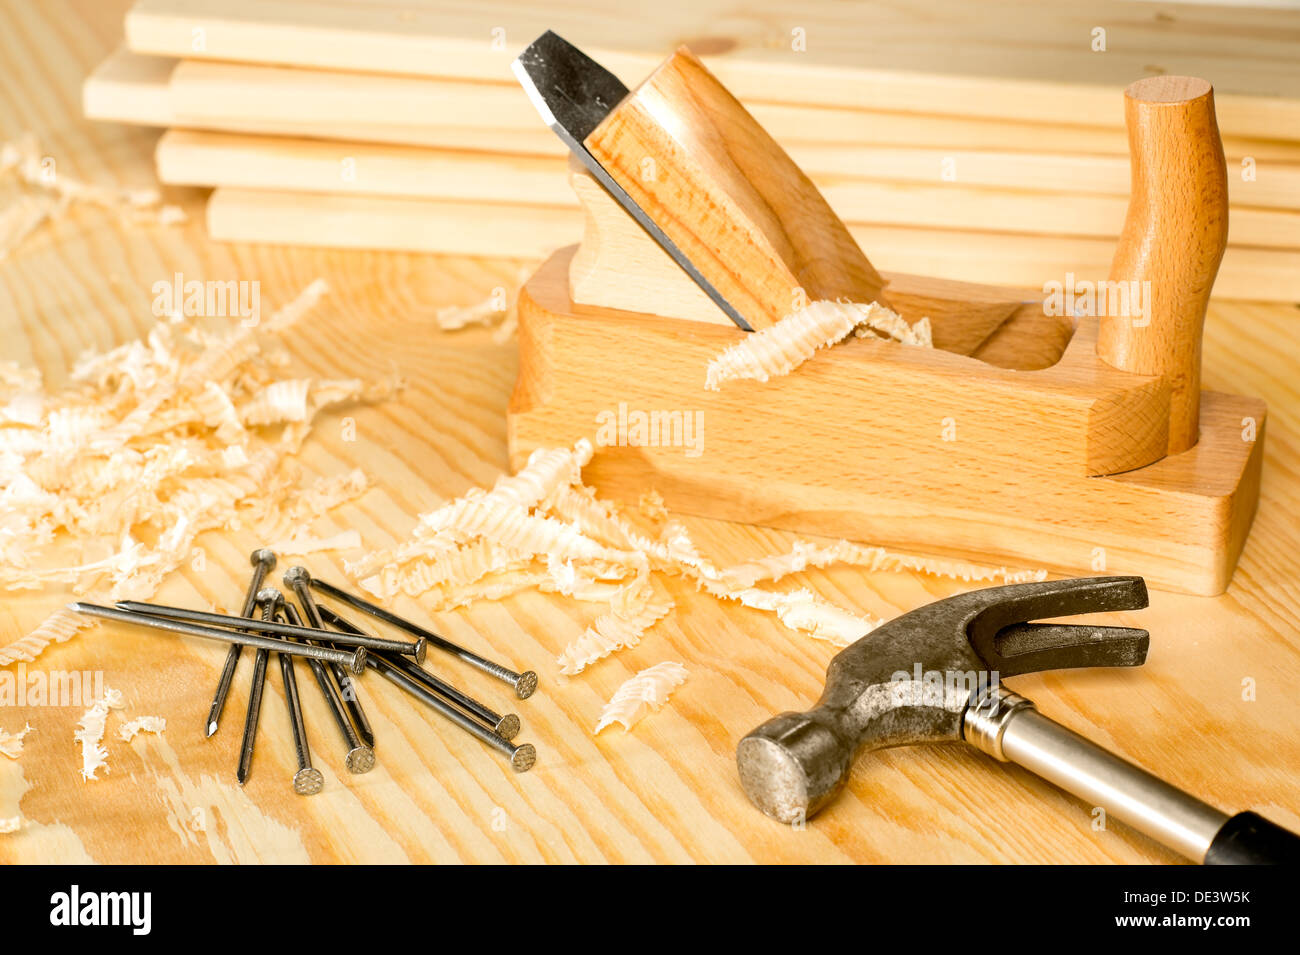 Carpentery selection of woodwork tools Stock Photo